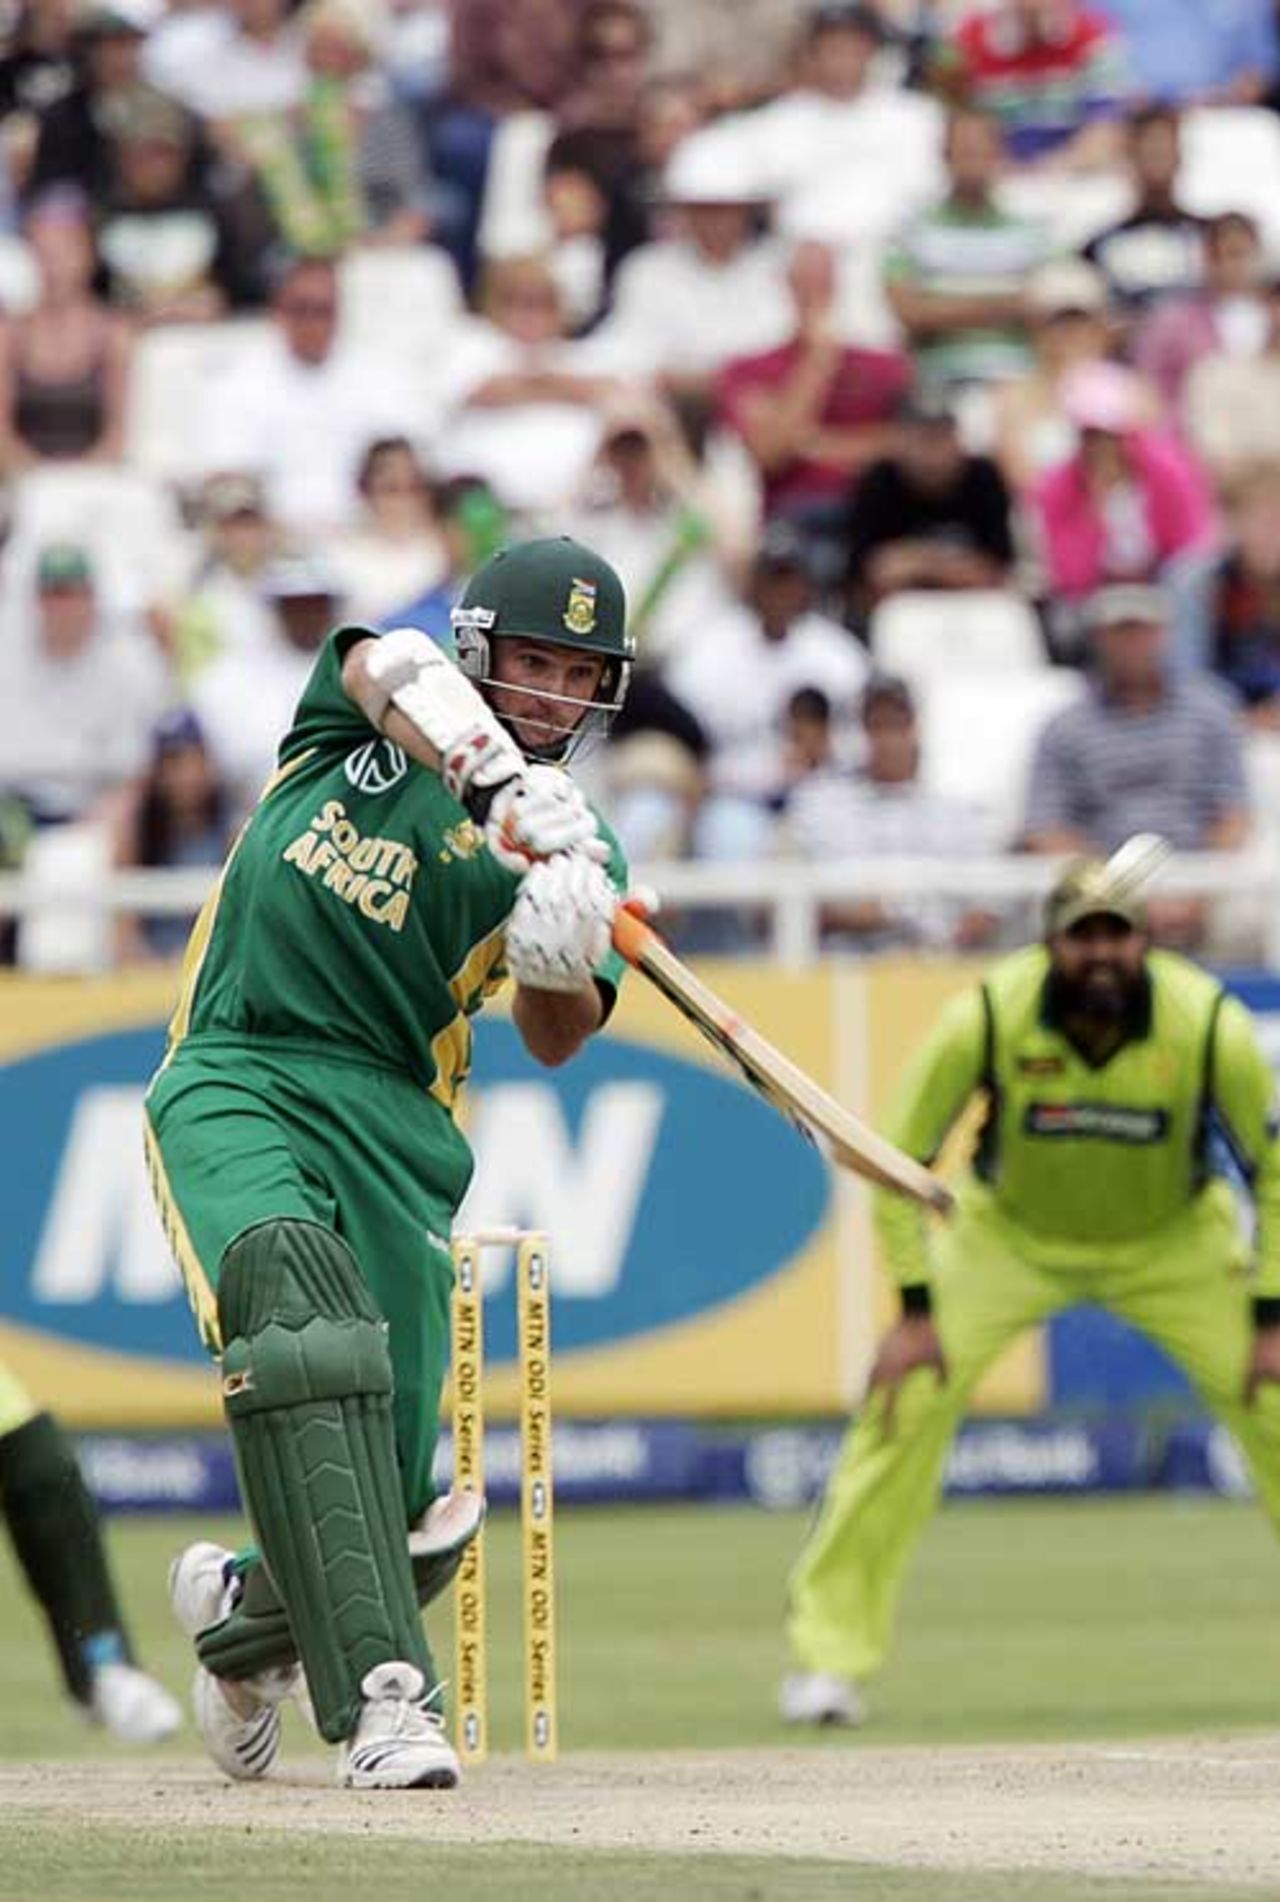 Graeme Smith slams the ball over the infield, South Africa v Pakistan, 4th ODI, Cape Town, February 11, 2007